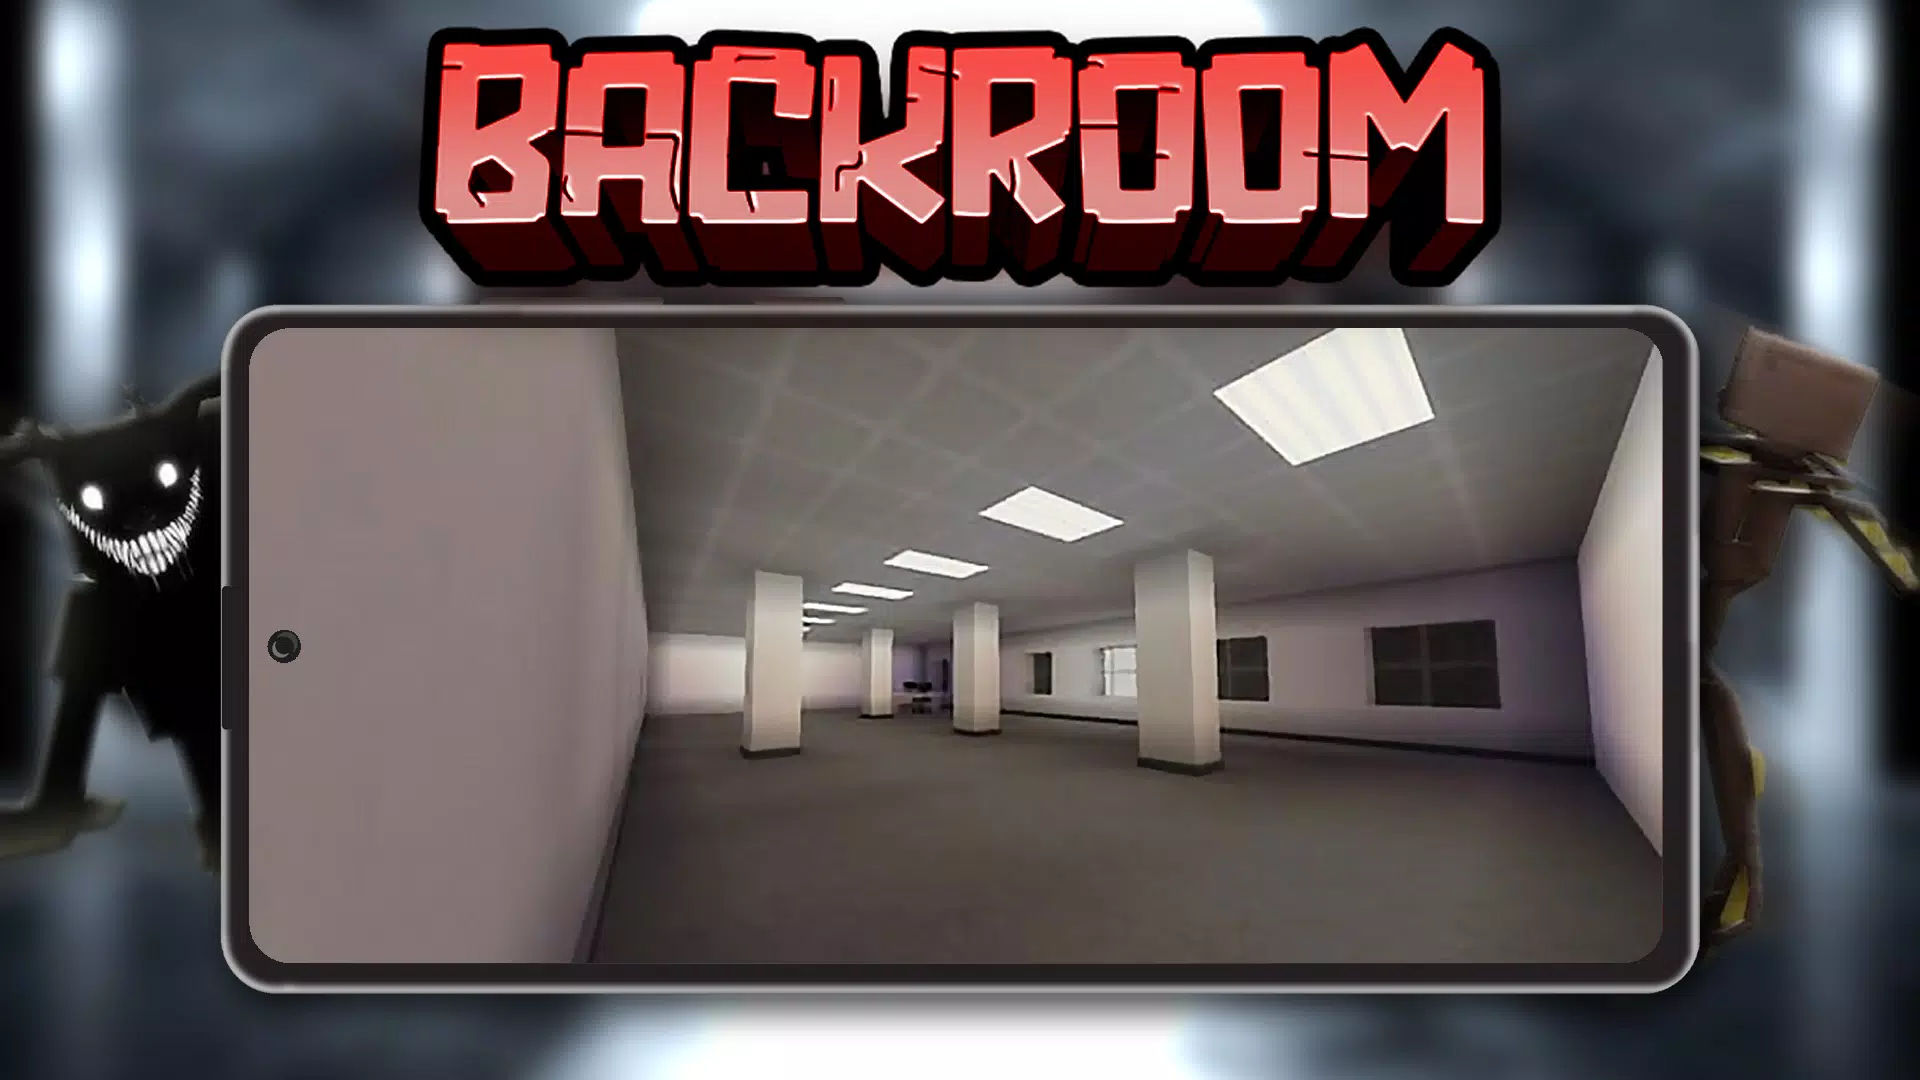 Inside the Backrooms Mobile - How to play on an Android or iOS phone? -  Games Manuals